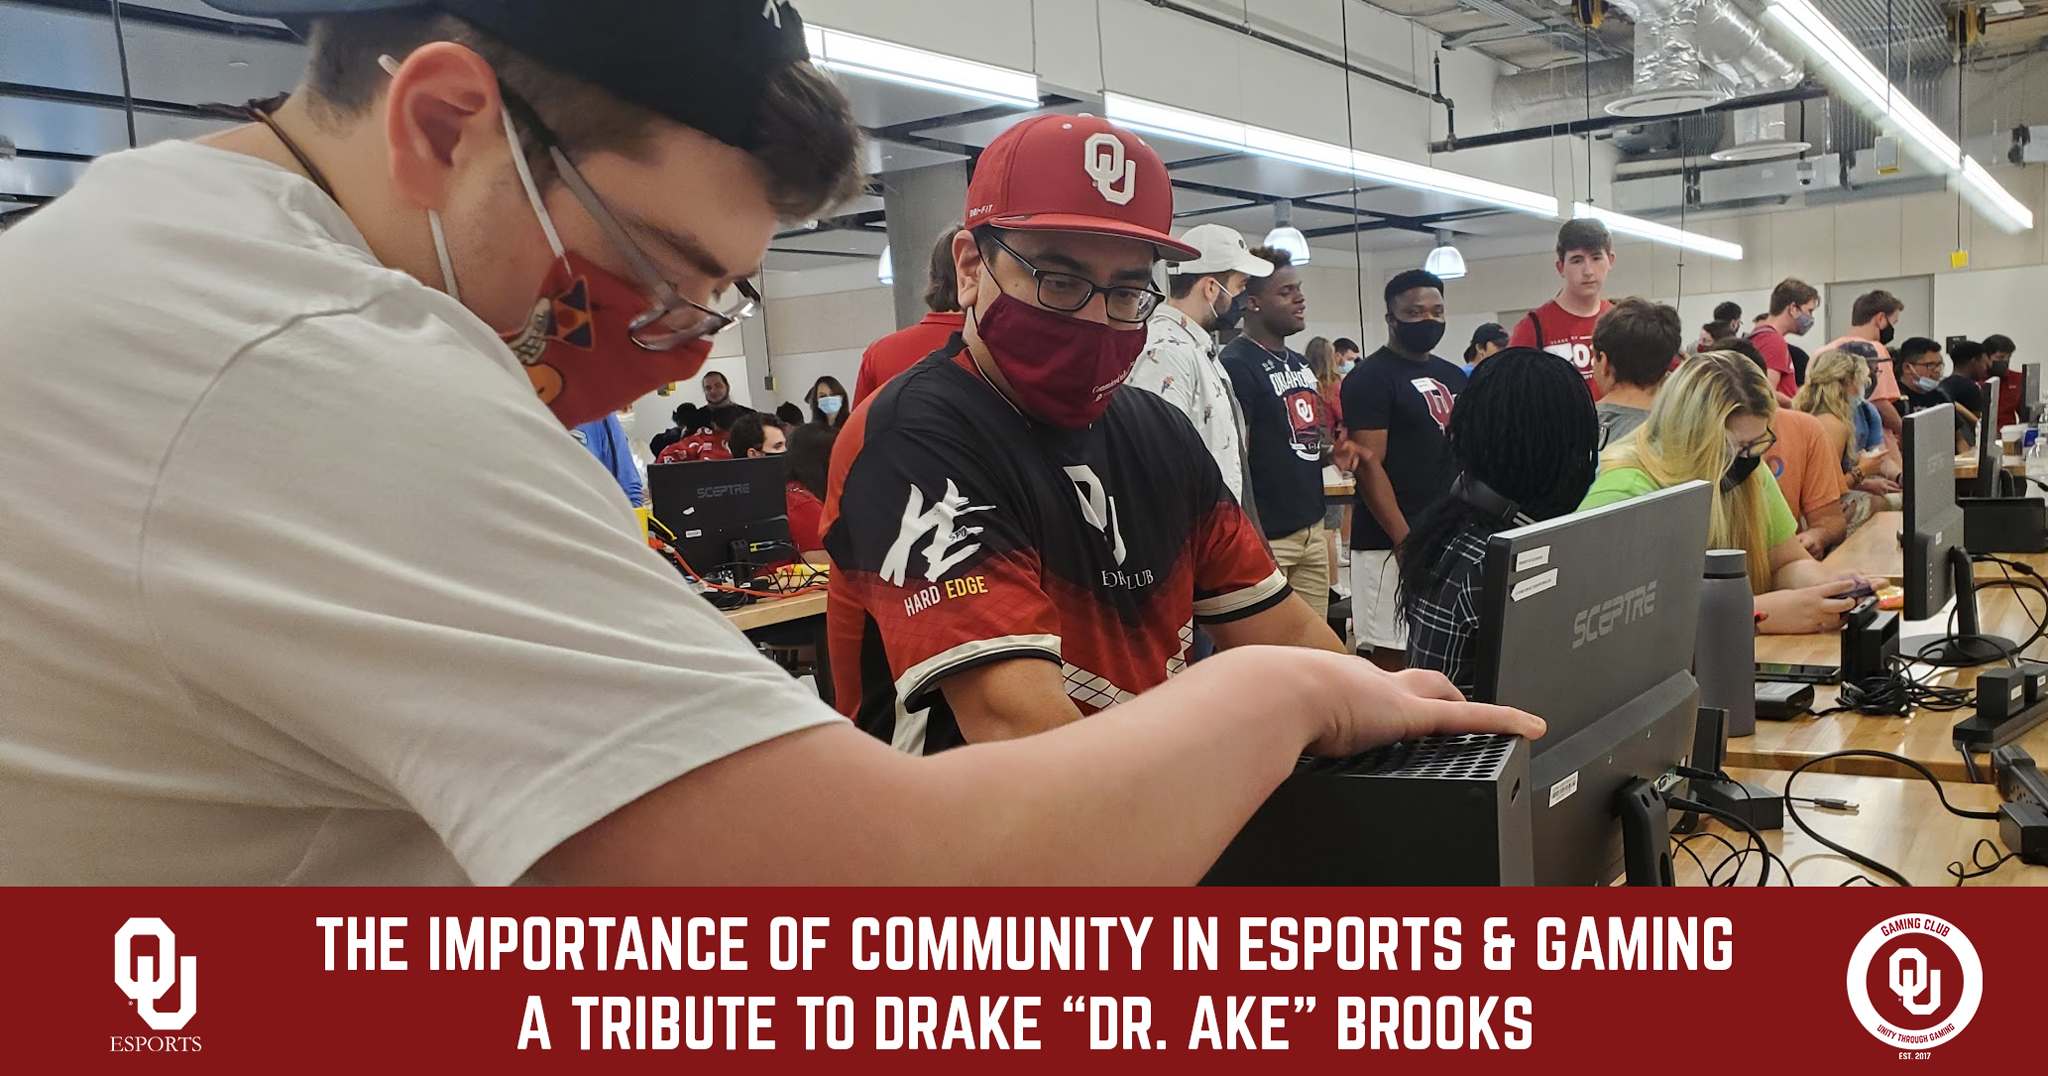 On March 3, 2021, The University of Oklahoma announced the Solidus Scholarships for esports and gaming opportunities. Our Media & News team at Sooner Esports provided a deep dive into what it all means and shares the story of Forest Dayne "Solidus" Sharp. 